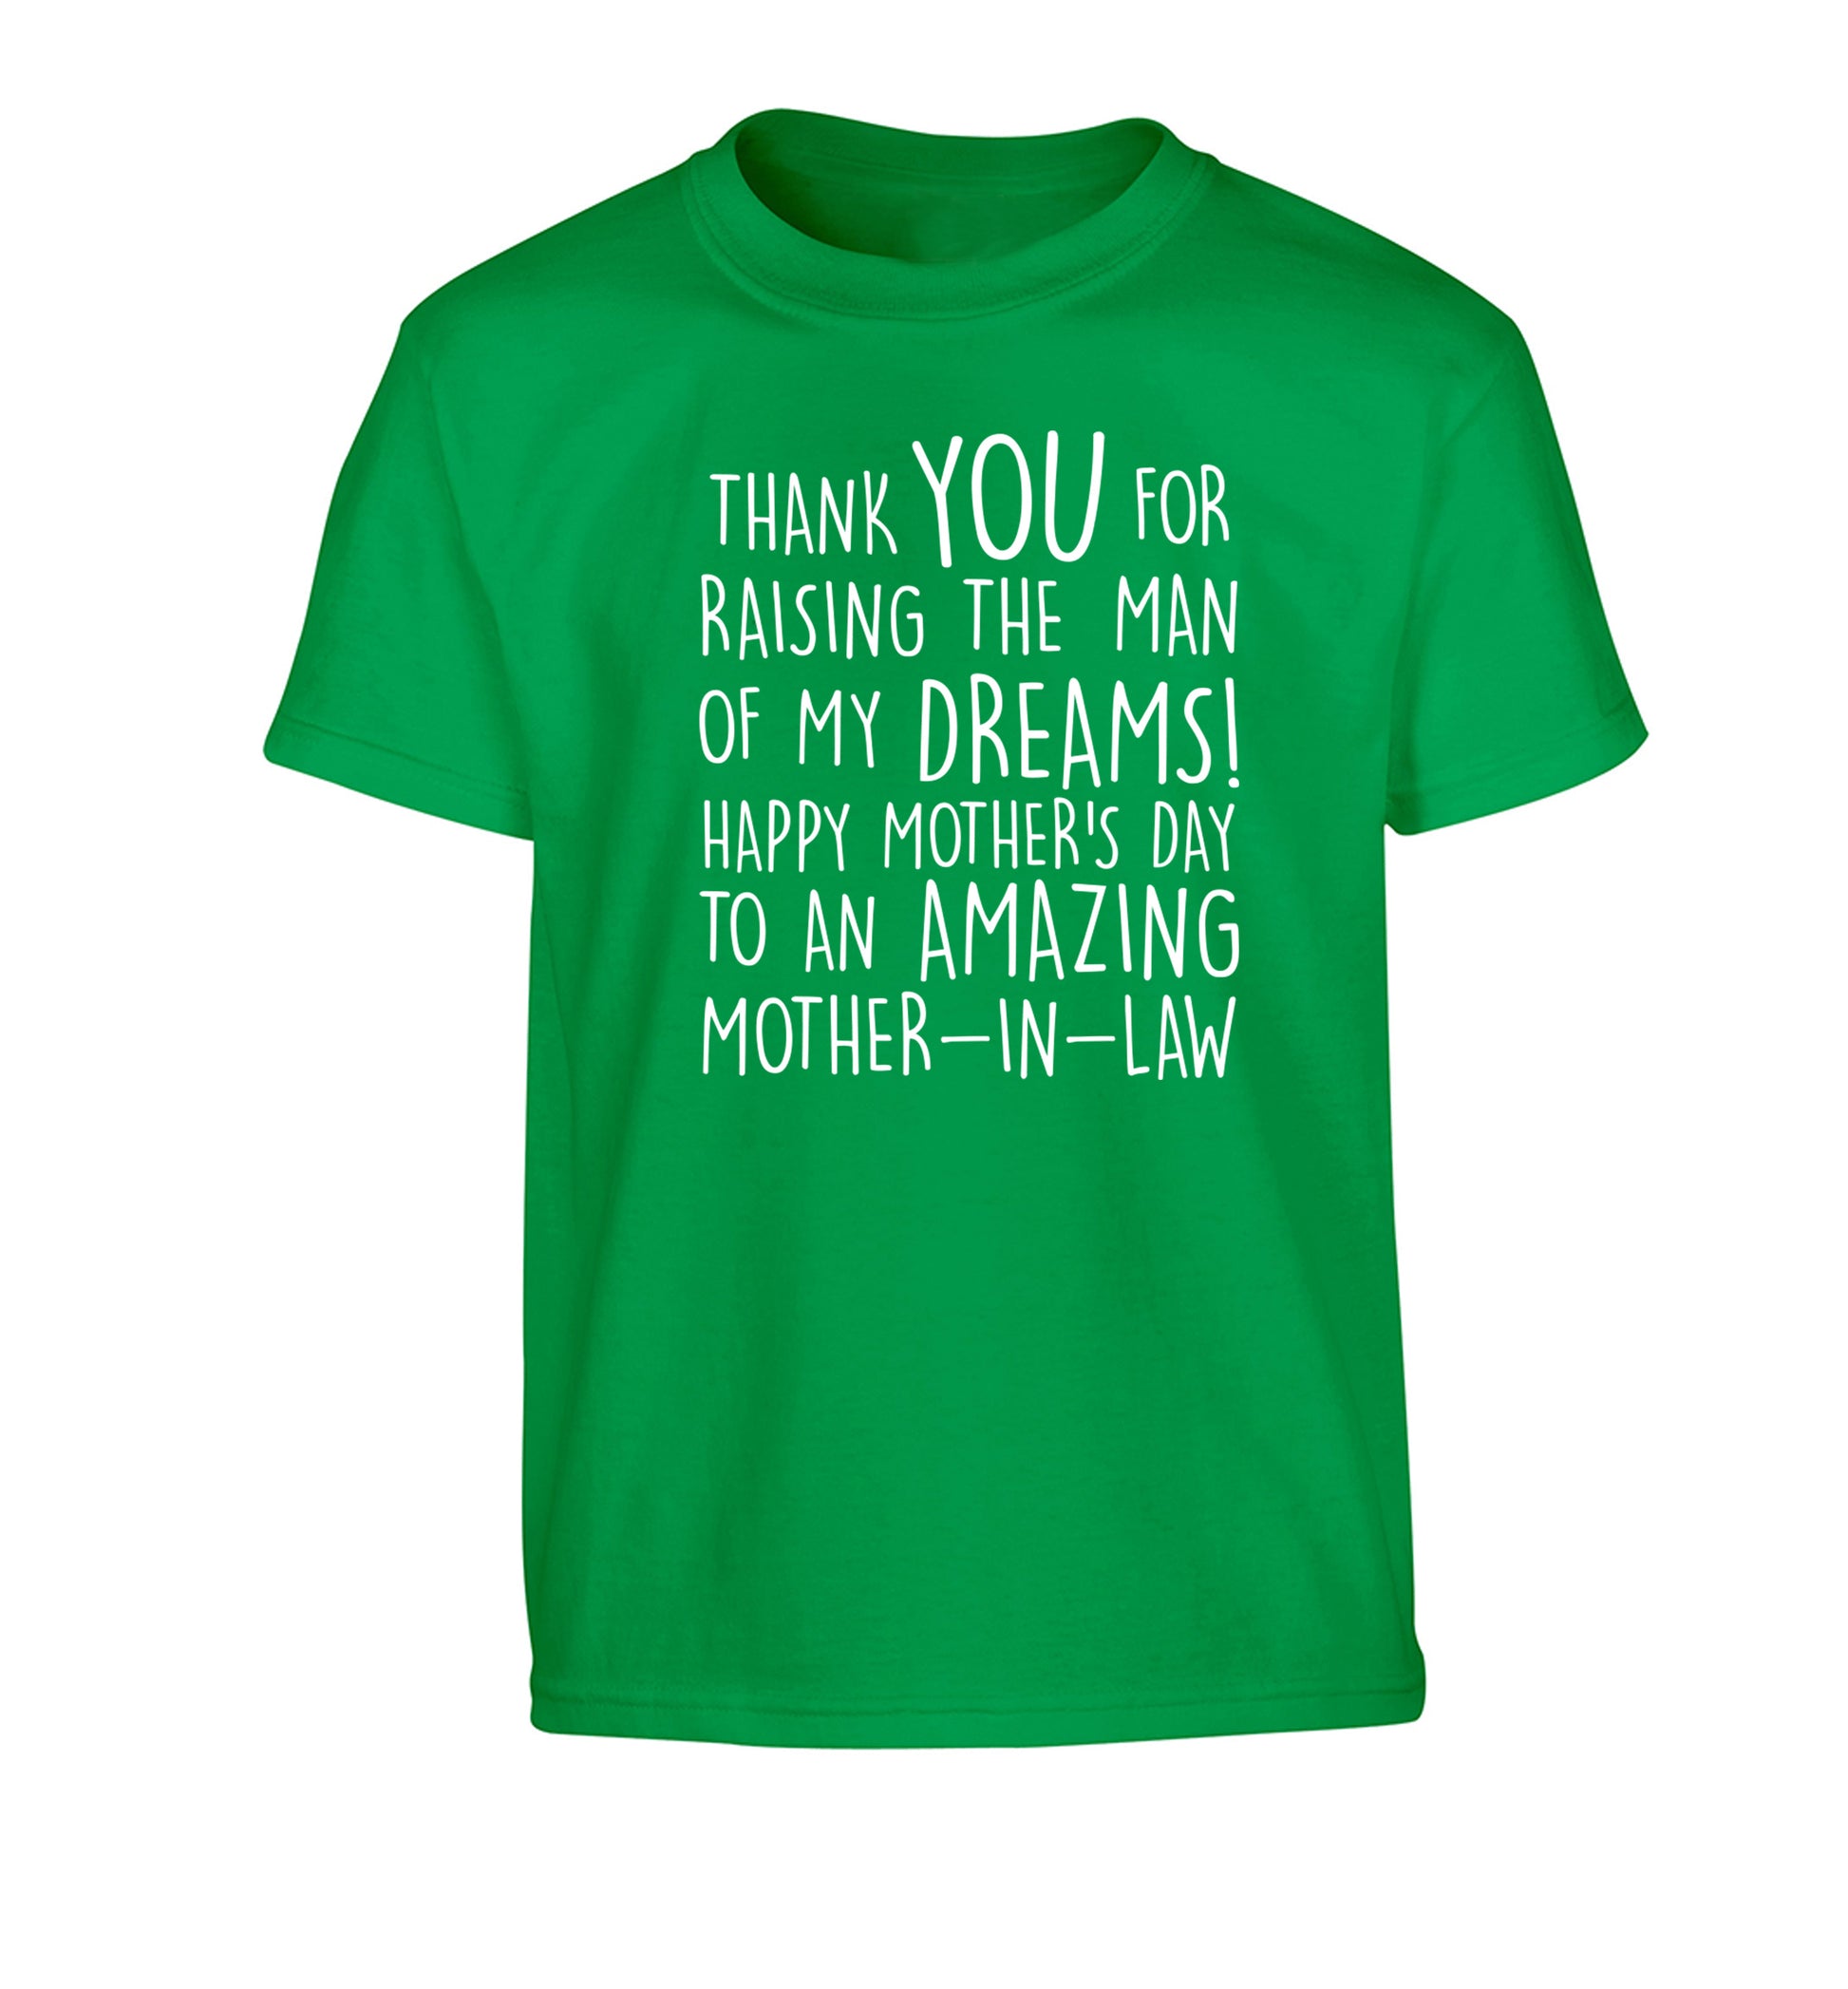 Thank you for raising the man of my dreams happy mother's day mother-in-law Children's green Tshirt 12-13 Years